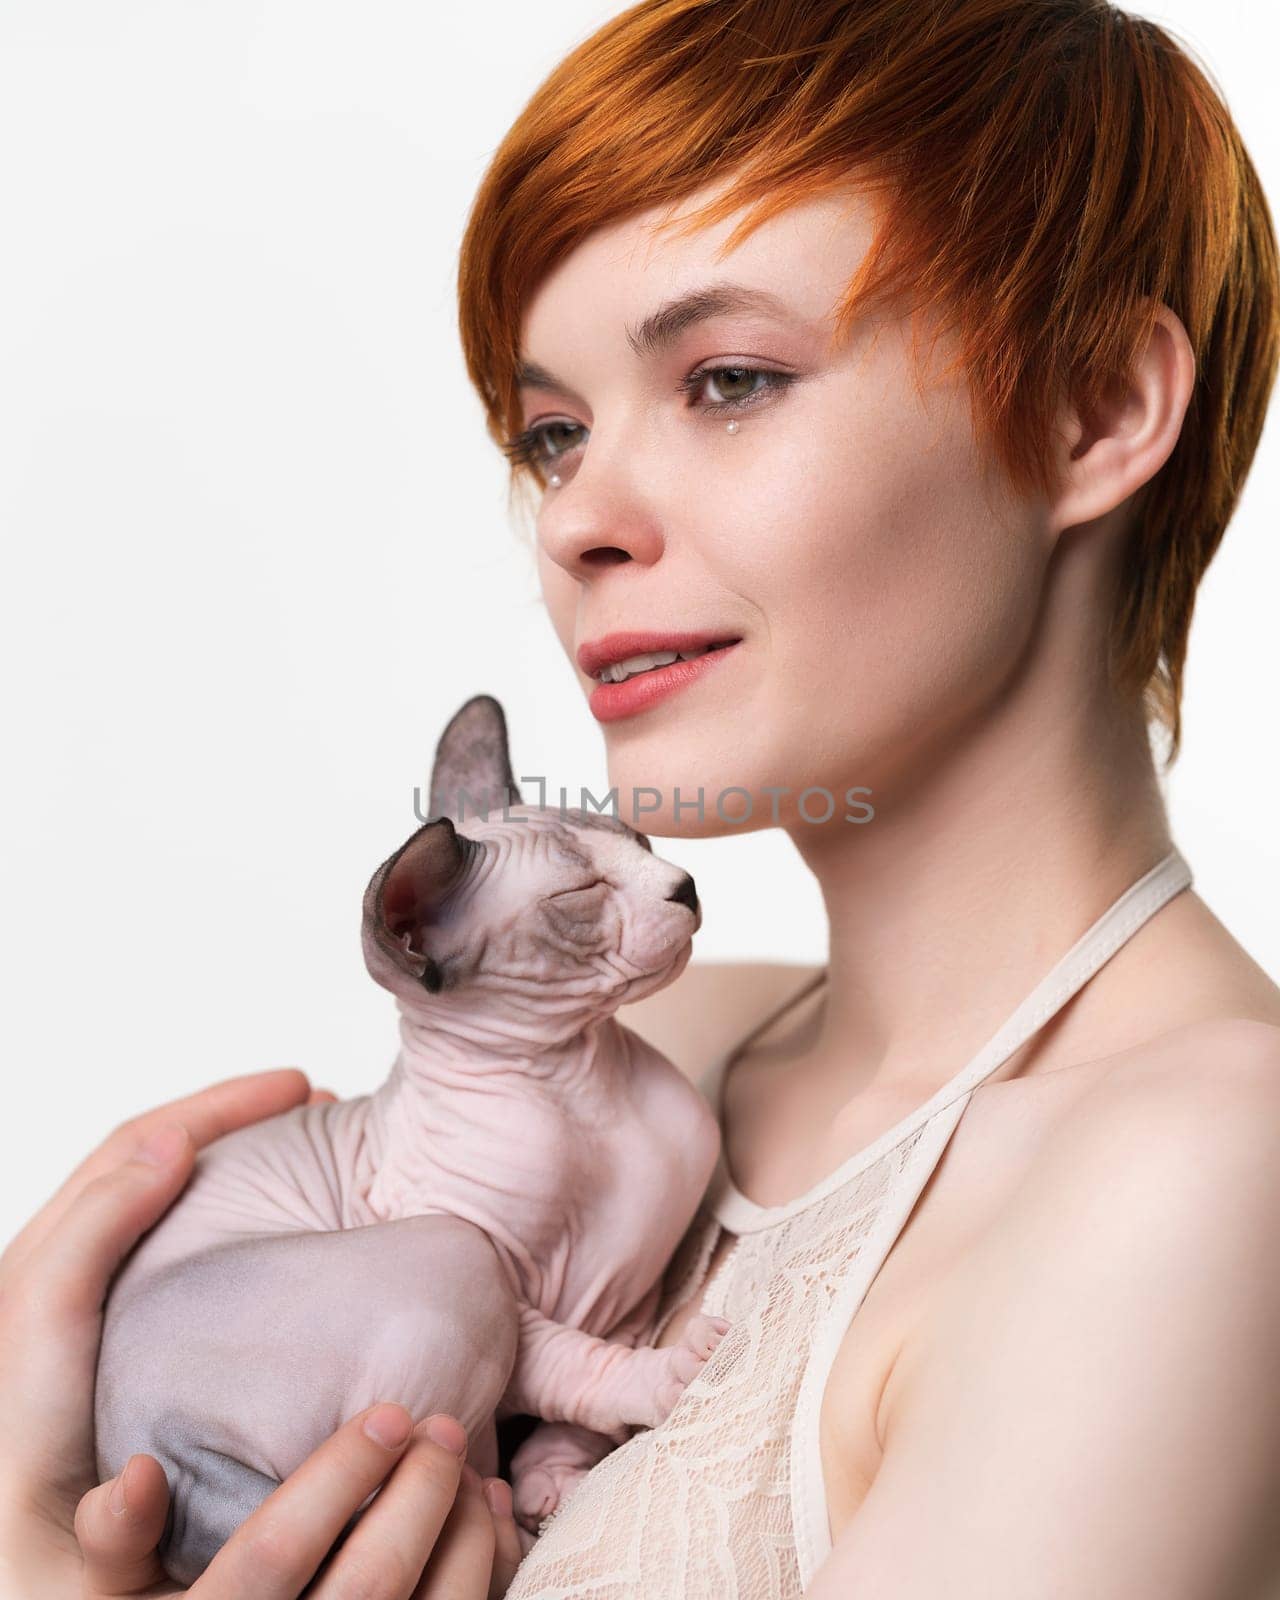 Cute redhead young woman gently hugging sleeping kitten to her chest and looking away. Portrait of pretty woman with short hair 25 years old. Studio shot on white background. Part of series.